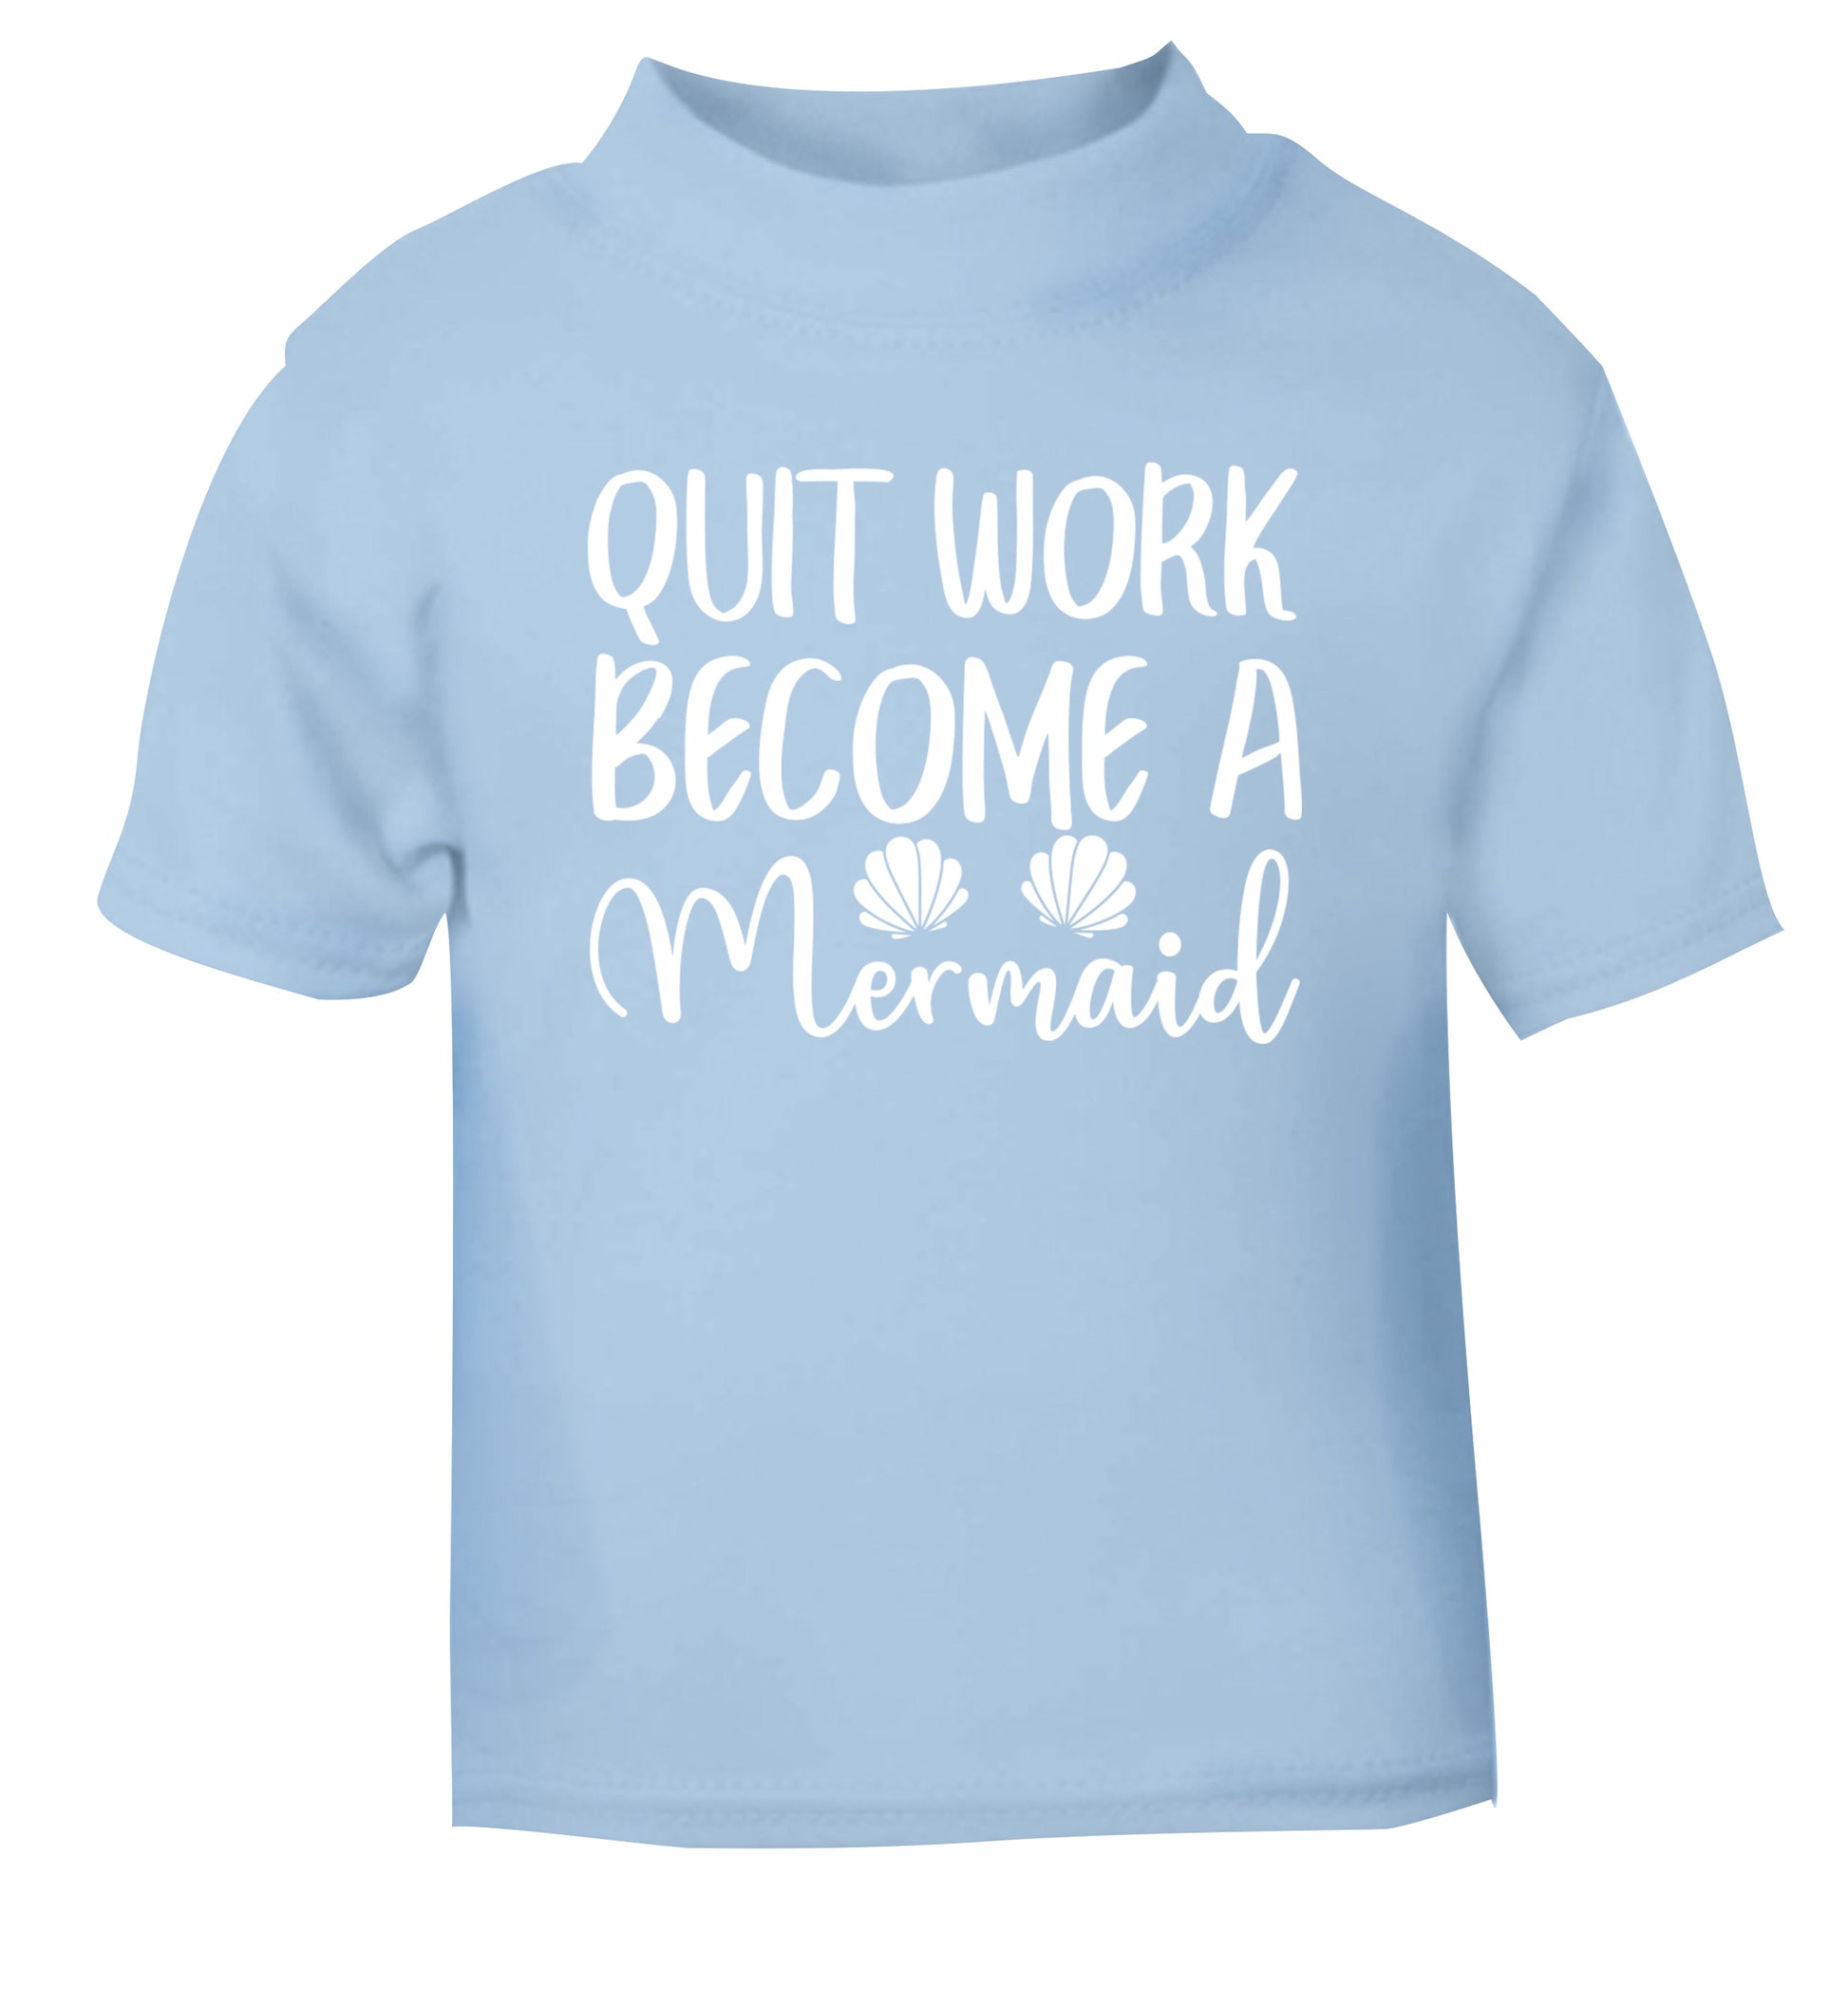 Quit work become a mermaid light blue Baby Toddler Tshirt 2 Years